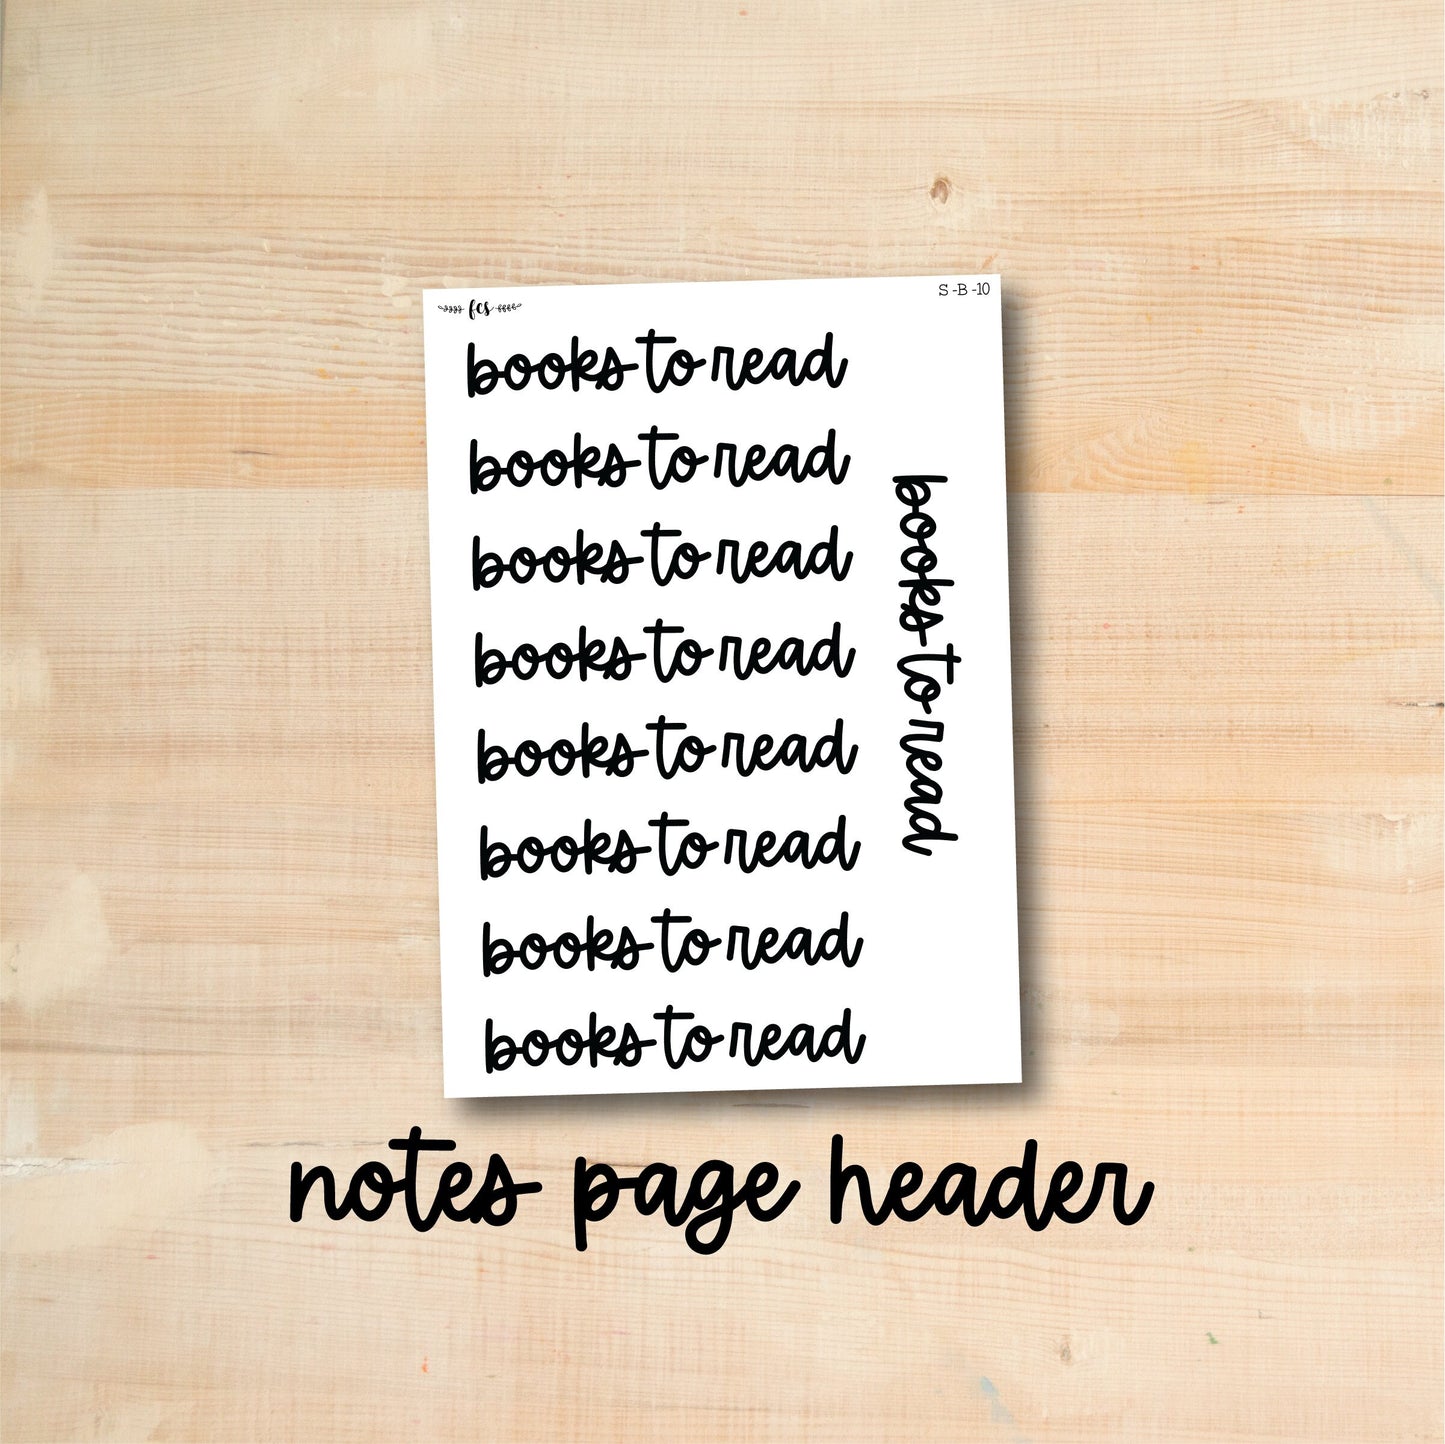 S-B-10 || BOOKS TO READ notes page header script stickers